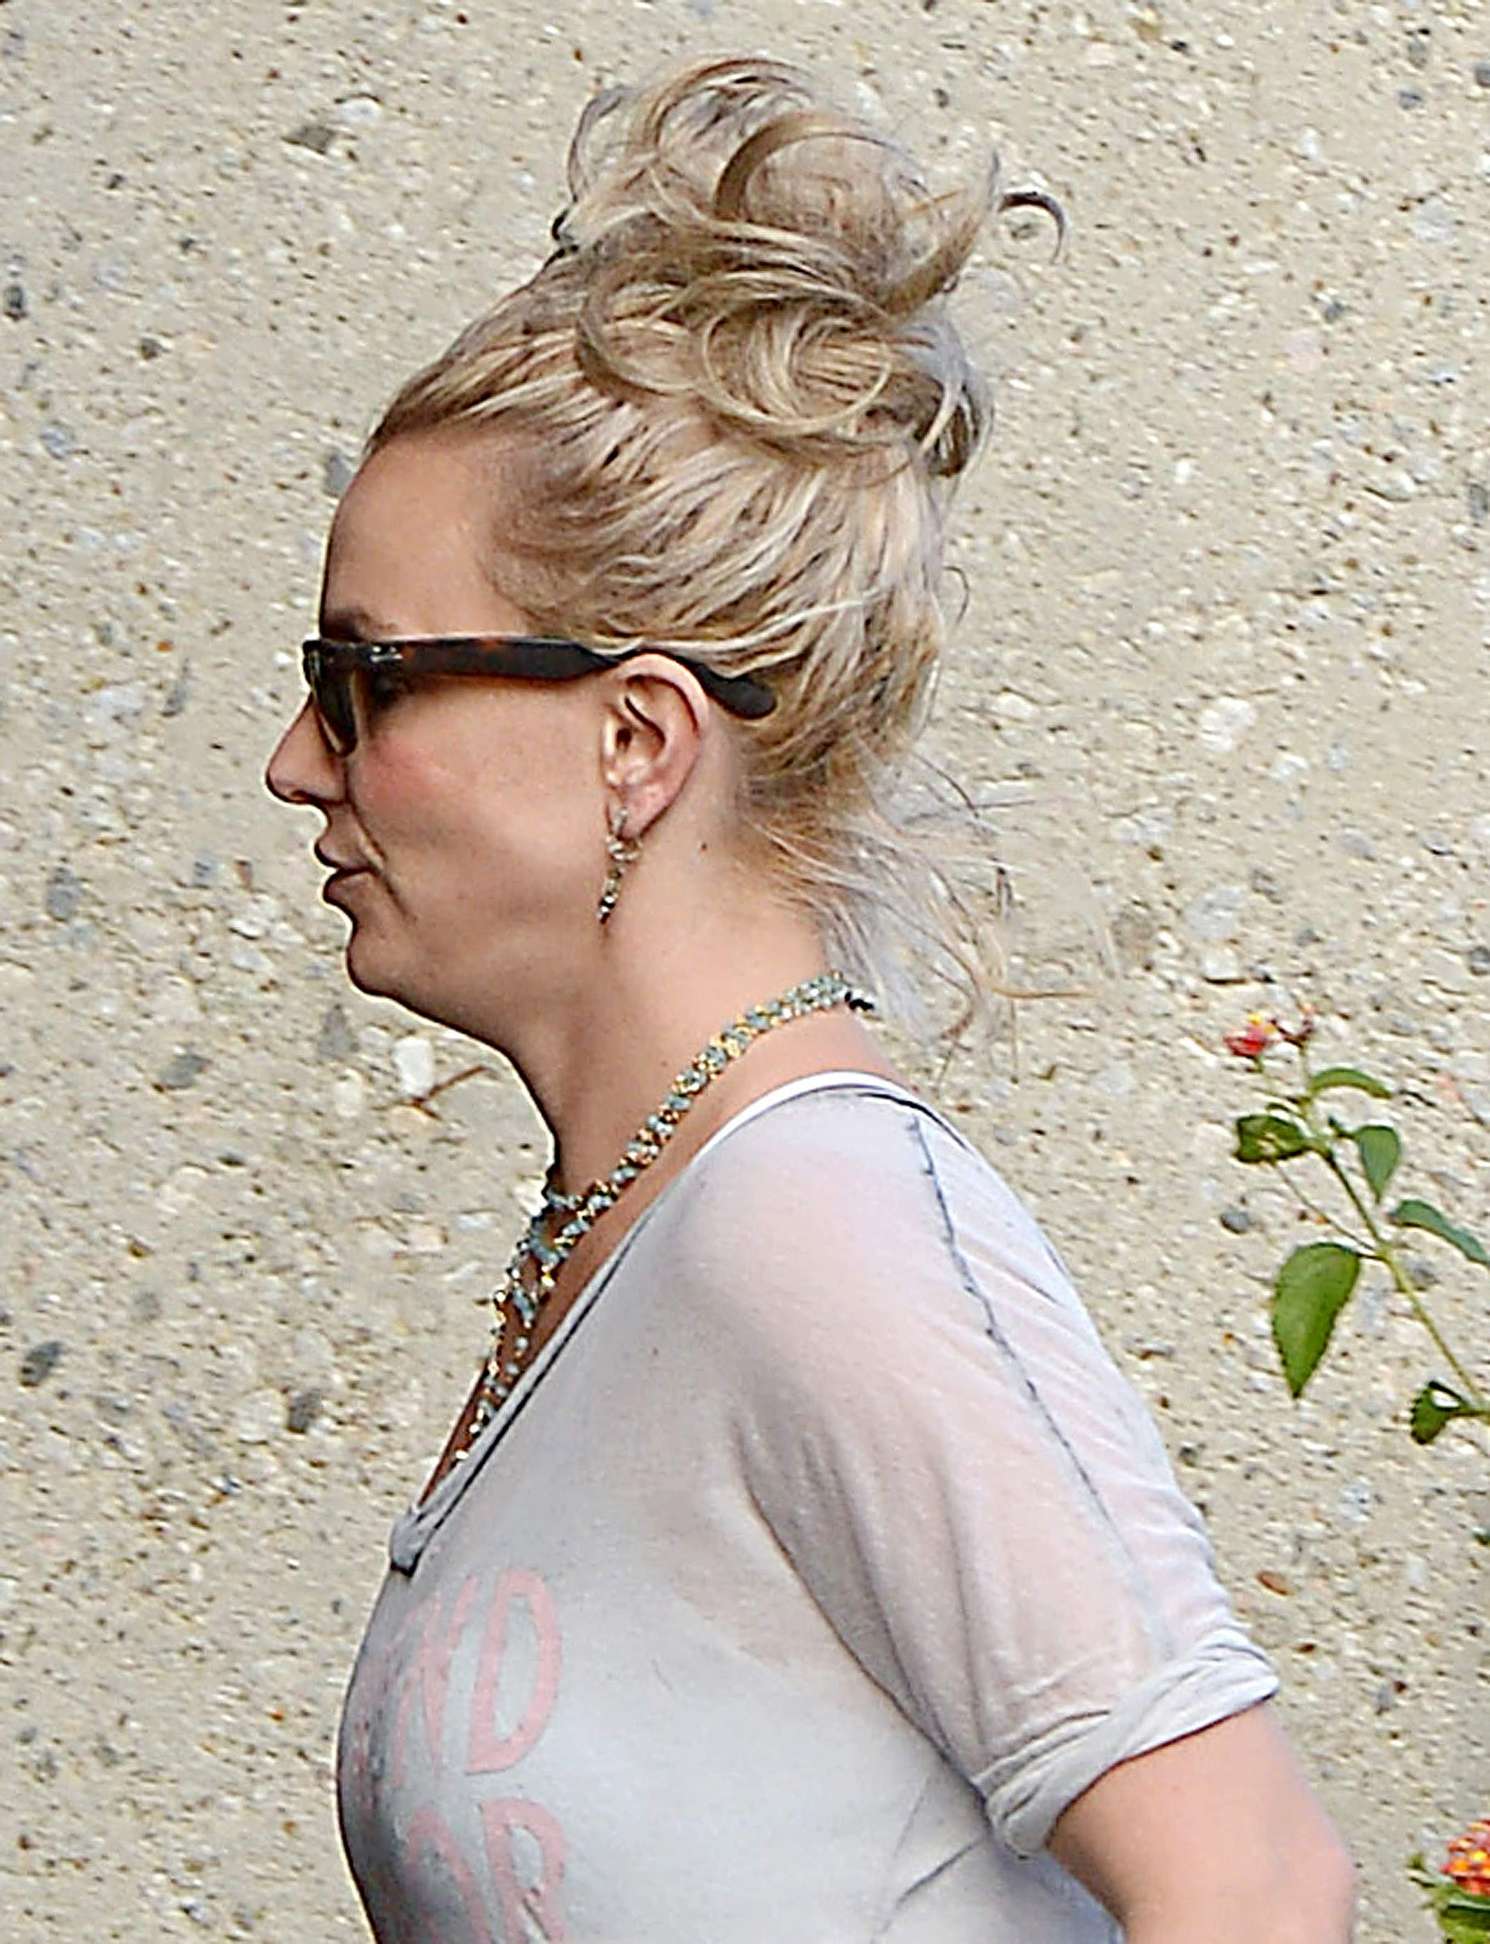 Britney Spears at the Recording Studio in Calabasas